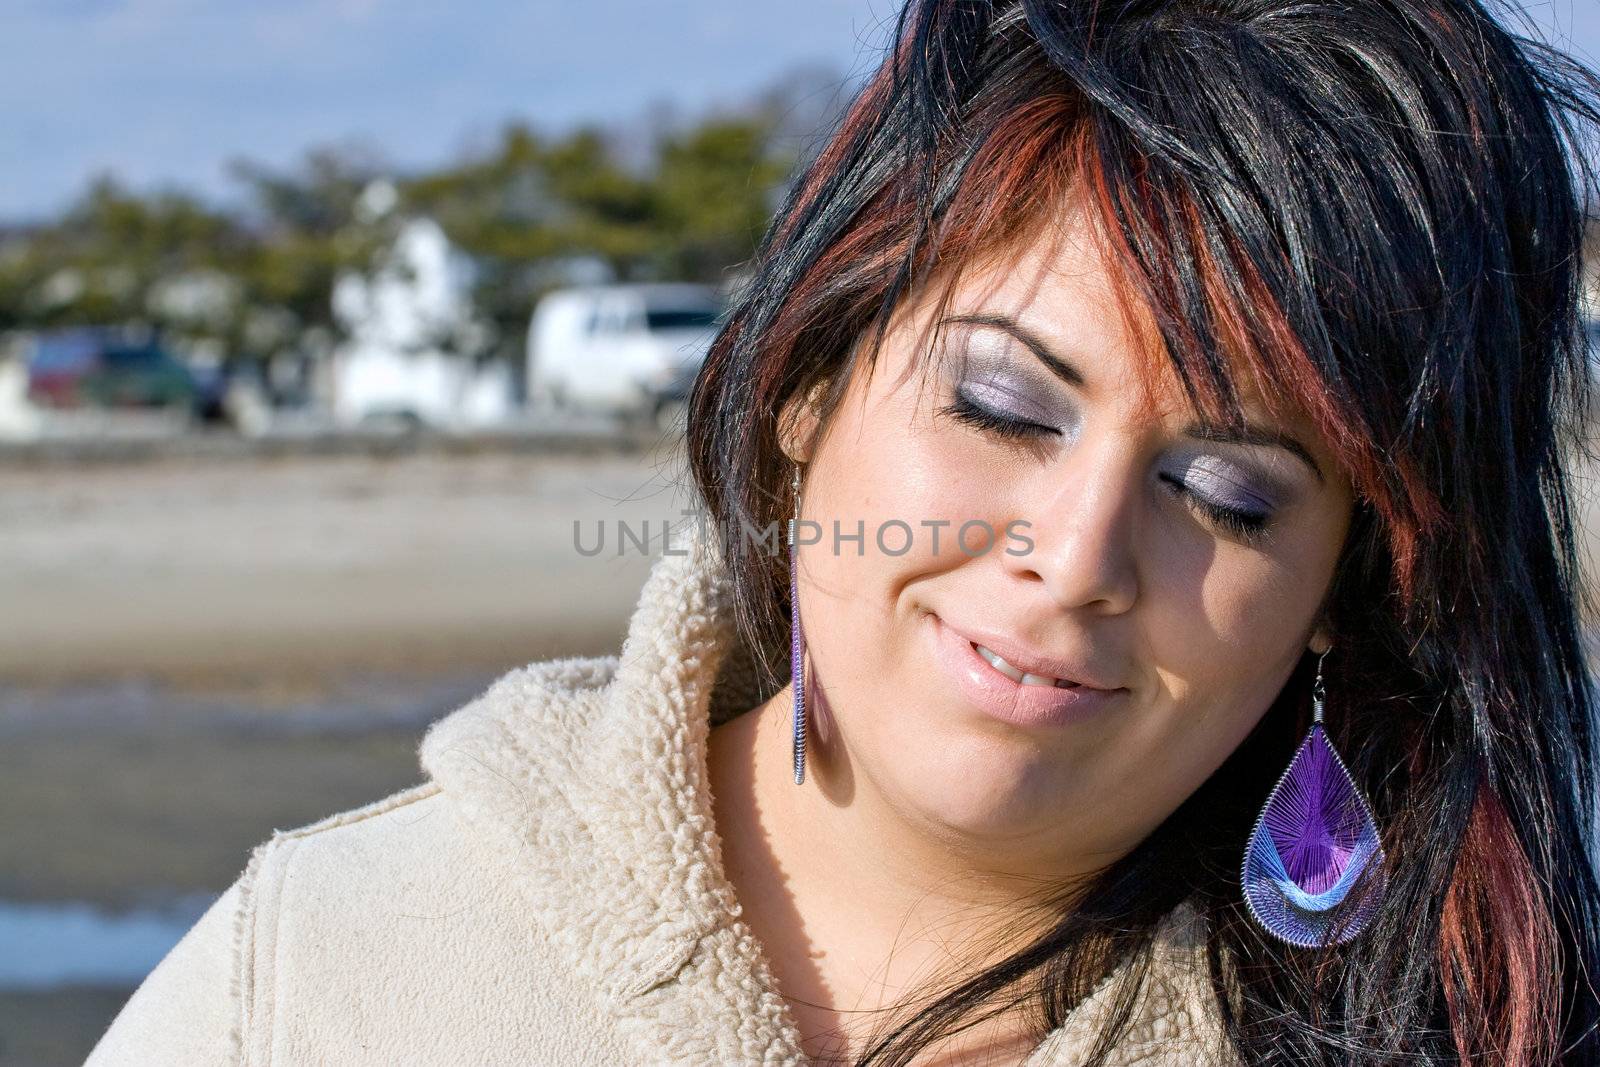 A young Hispanic woman soaking up some Vitamin D from the warm sunlight at the beach.